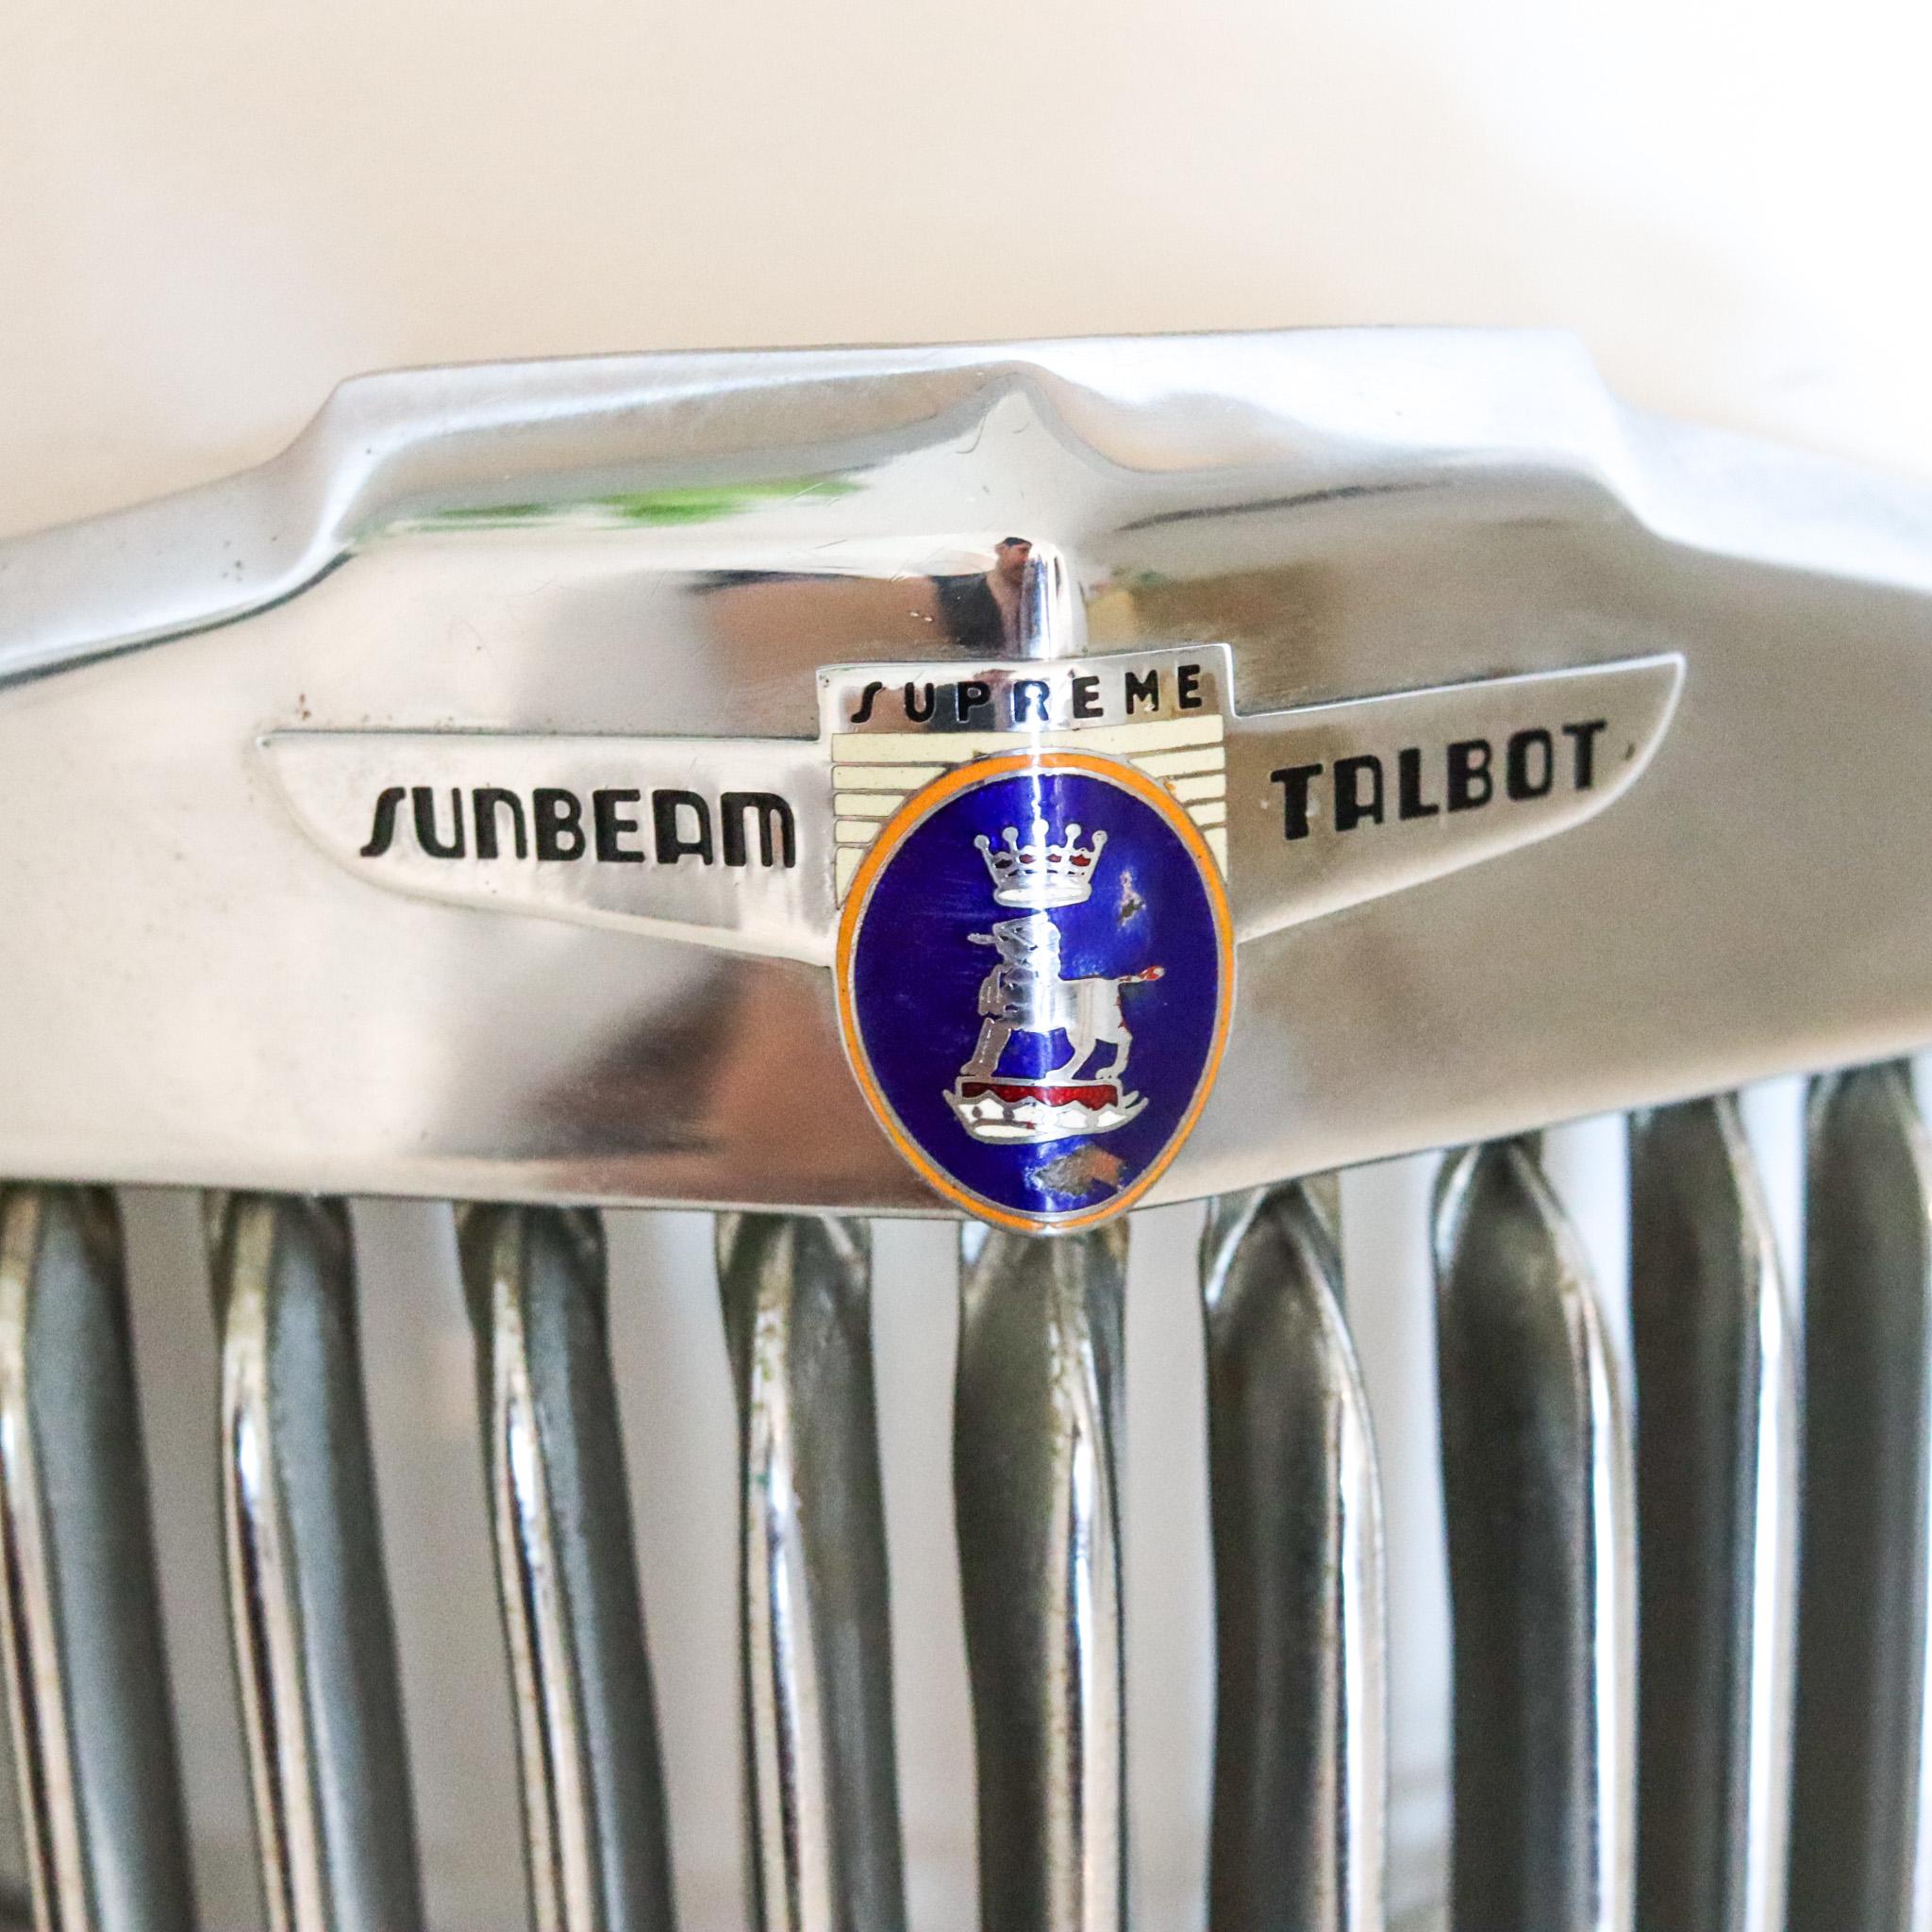 Art Deco Sunbeam Supreme Talbot Rare 1947 Radiator Cover Front In Steel And Enamel For Sale